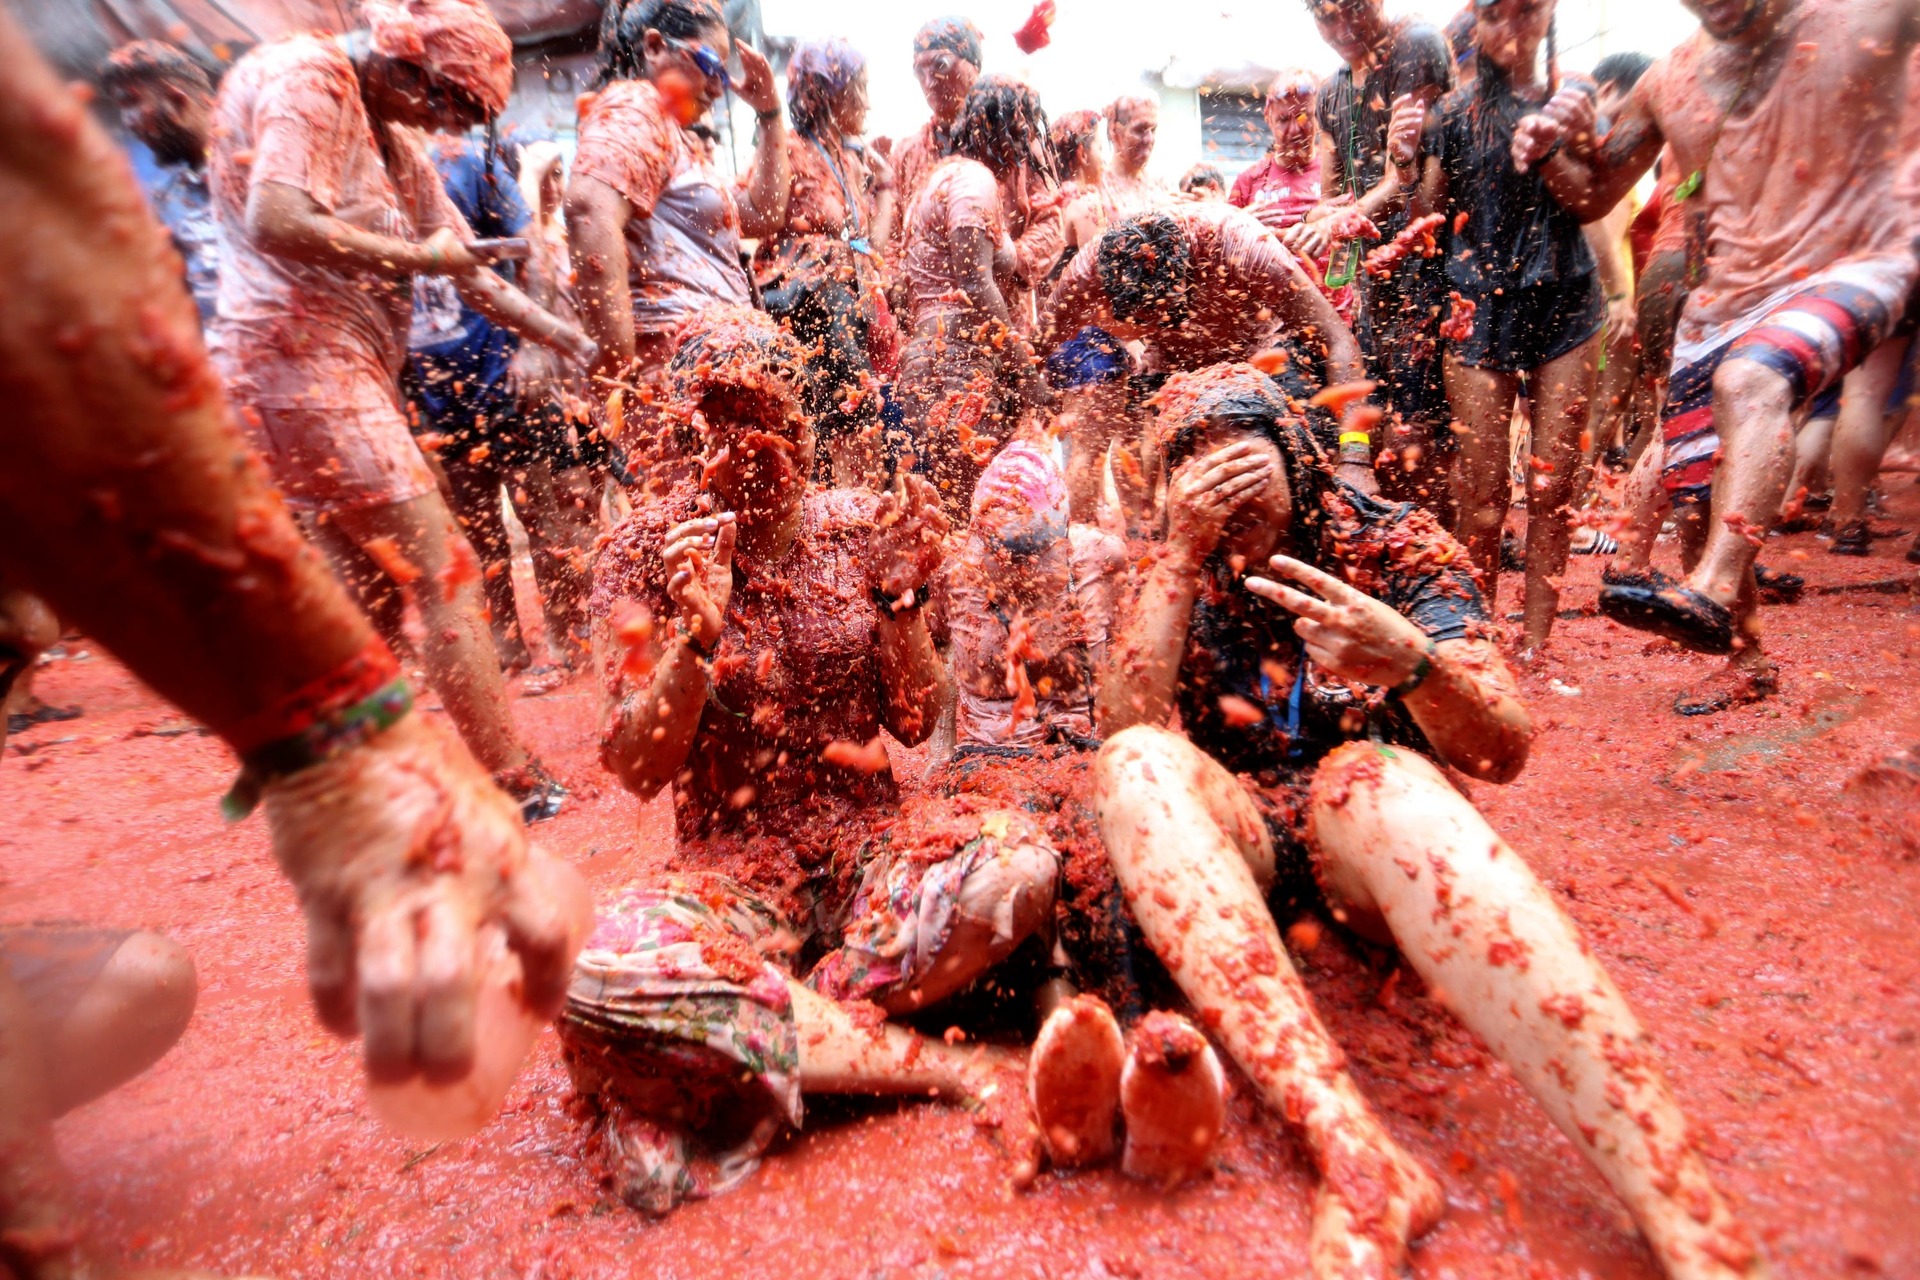 The street fight leaves both the street, its houses and participants drenched in red pulp (Alberto Saiz/AP)
